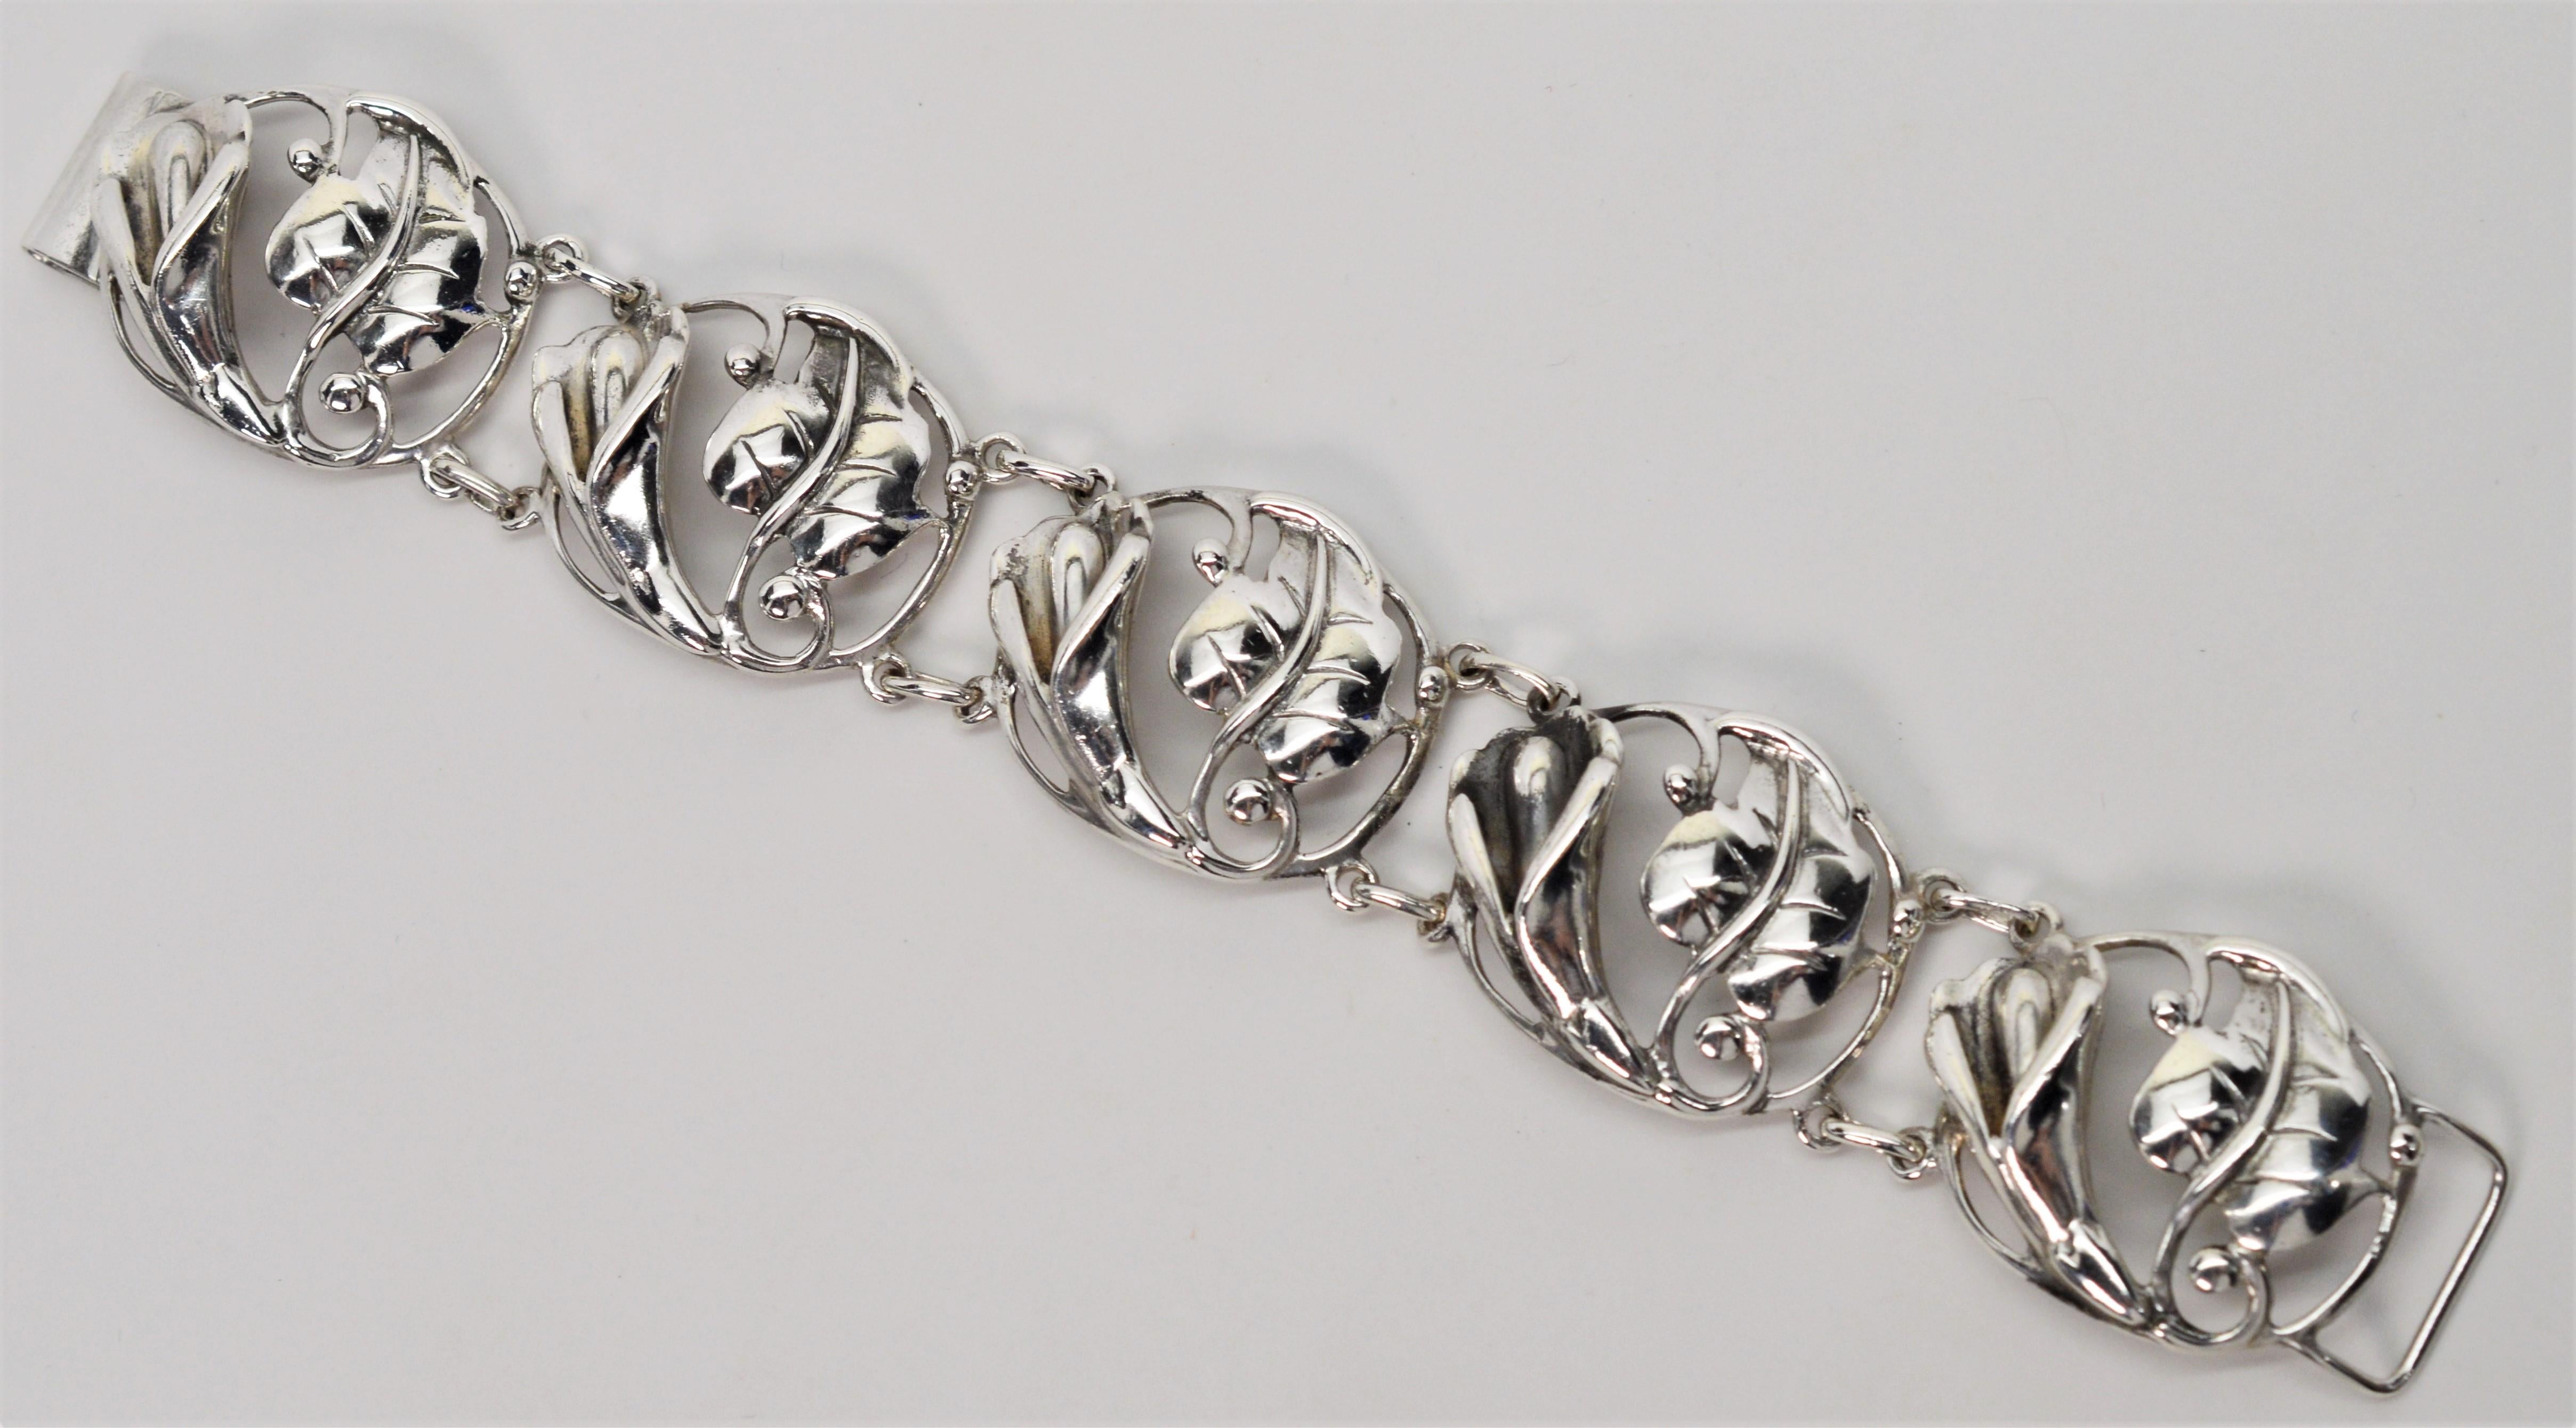 Vintage and stamped by the maker, this attractive timeless sterling silver bracelet displays five round crafted links of pretty lilies and leaves creating
a pleasing, well constructed piece, perfect for silver lovers. Bracelet measures 7-1/2 inches